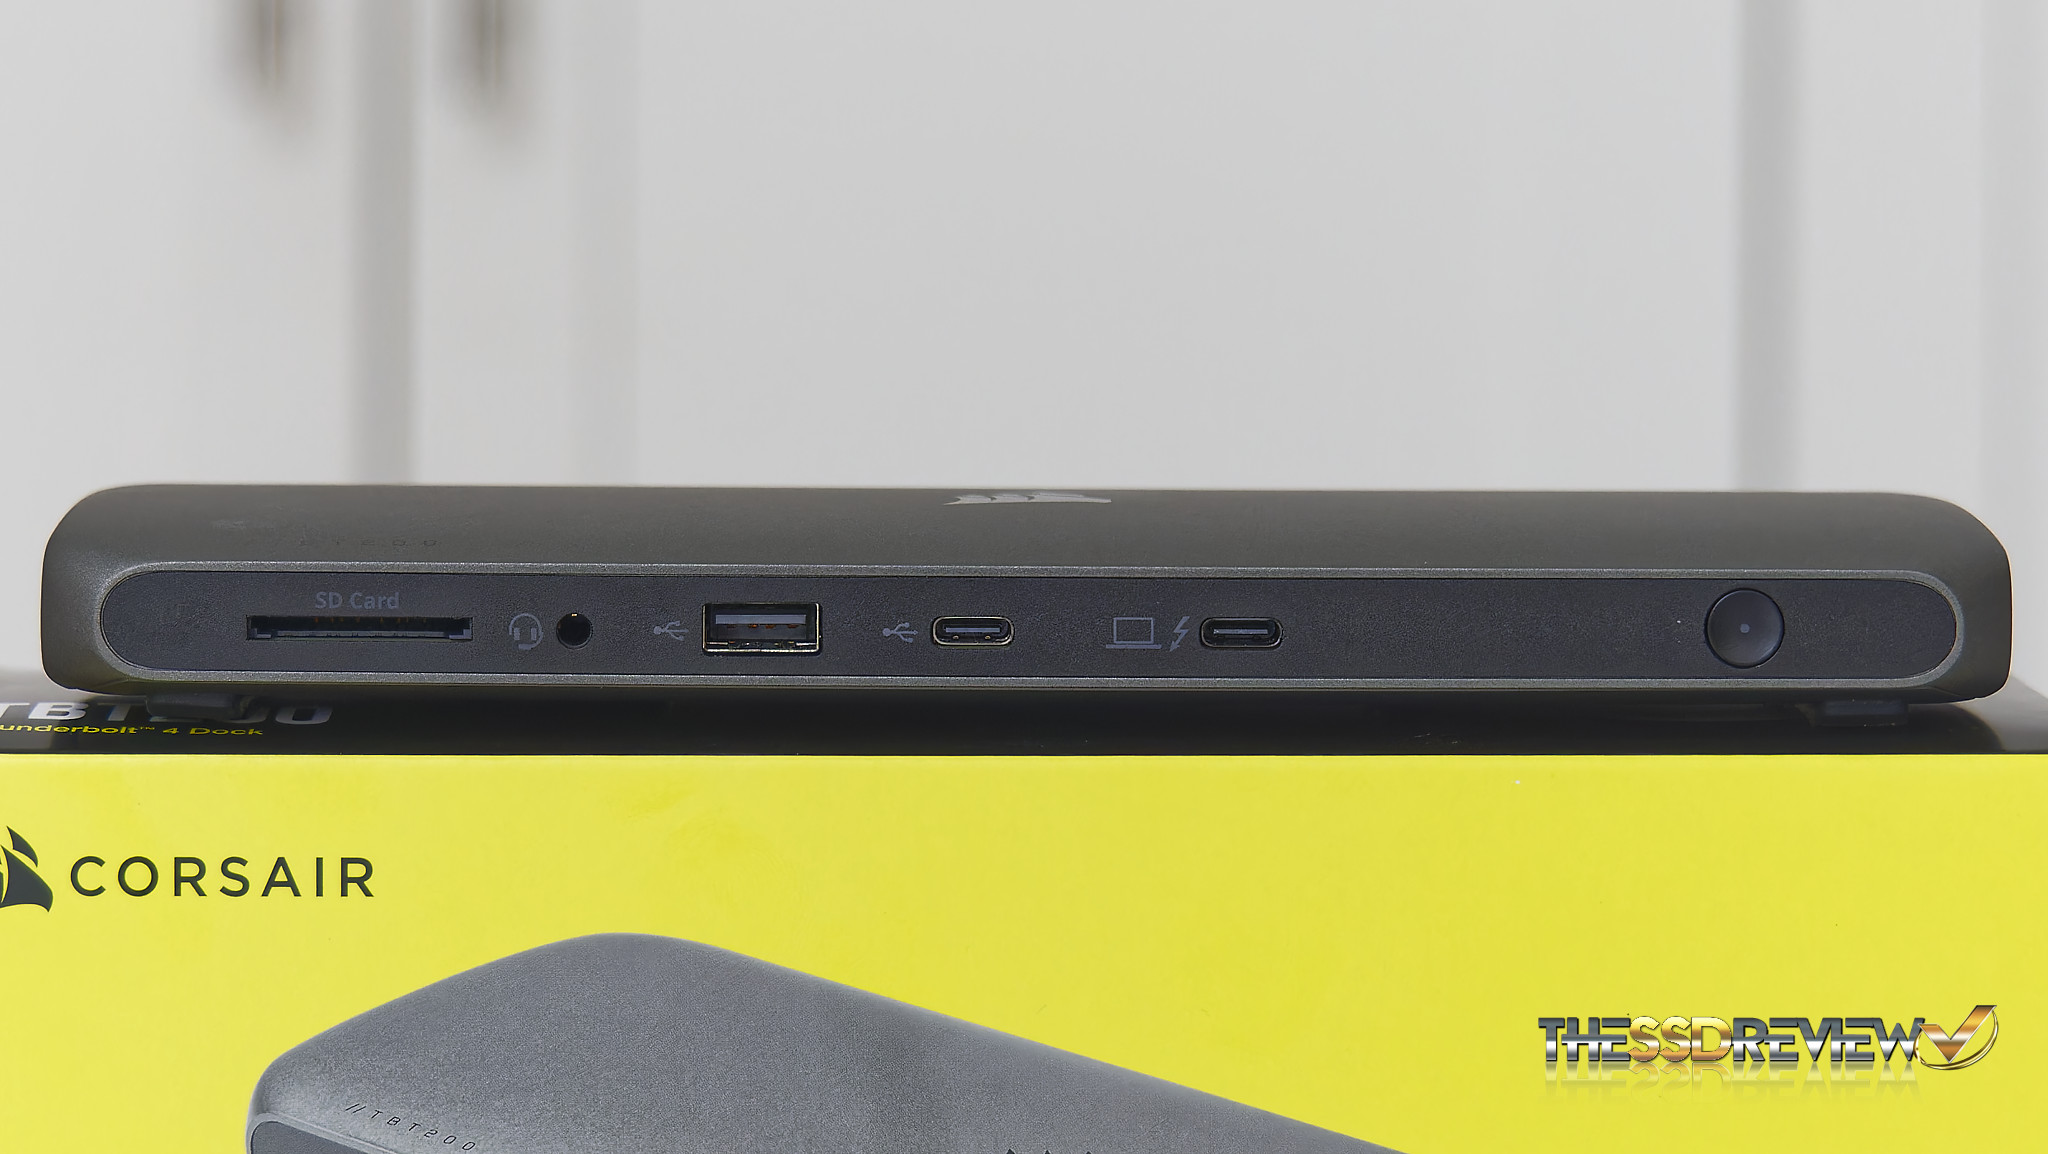 Corsair TBT200 ThunderBolt 4 Dock Review - Up to 96W Power Delivery and all  the Tb4 Ports One Could Need | The SSD Review